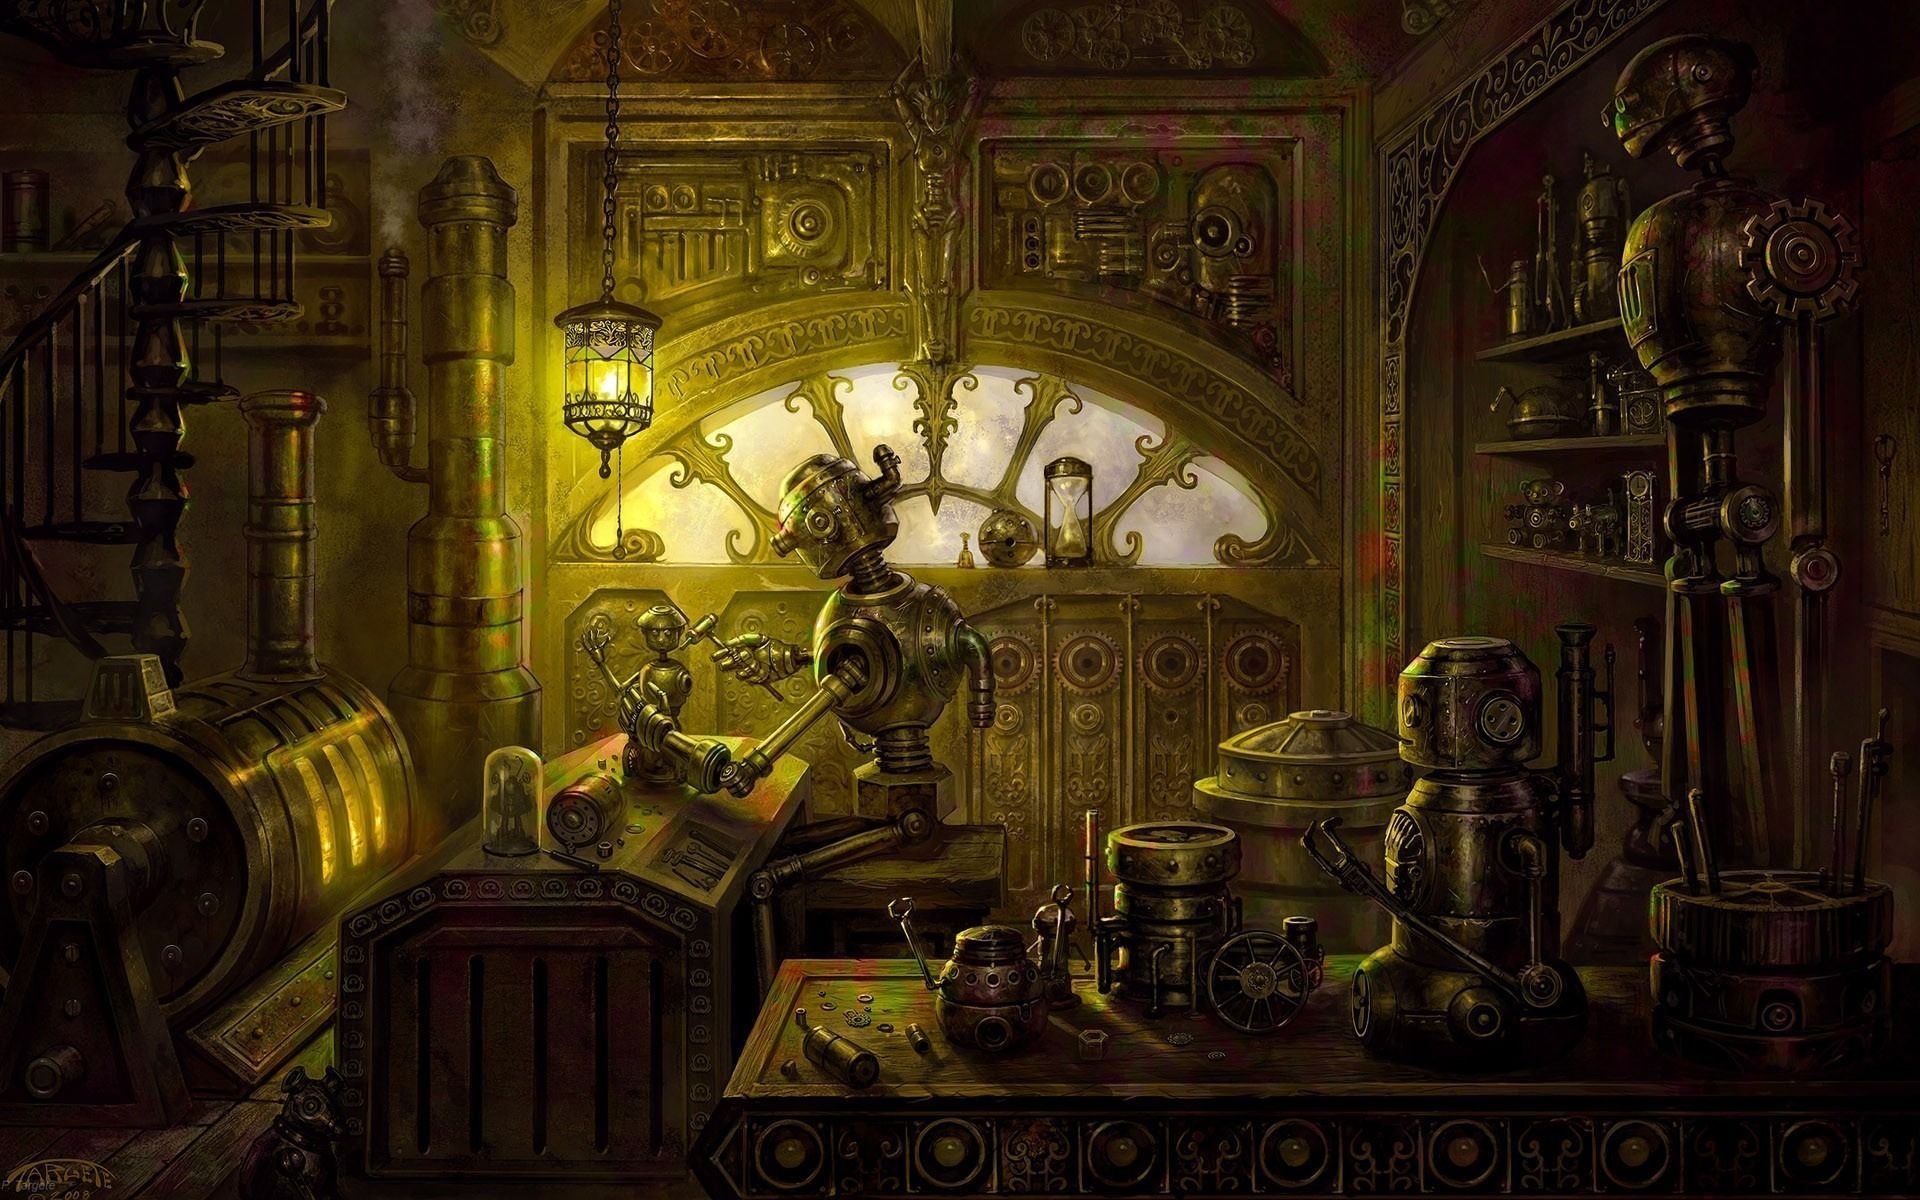 280 Steampunk HD Wallpapers | Backgrounds - Wallpaper Abyss - Page 2